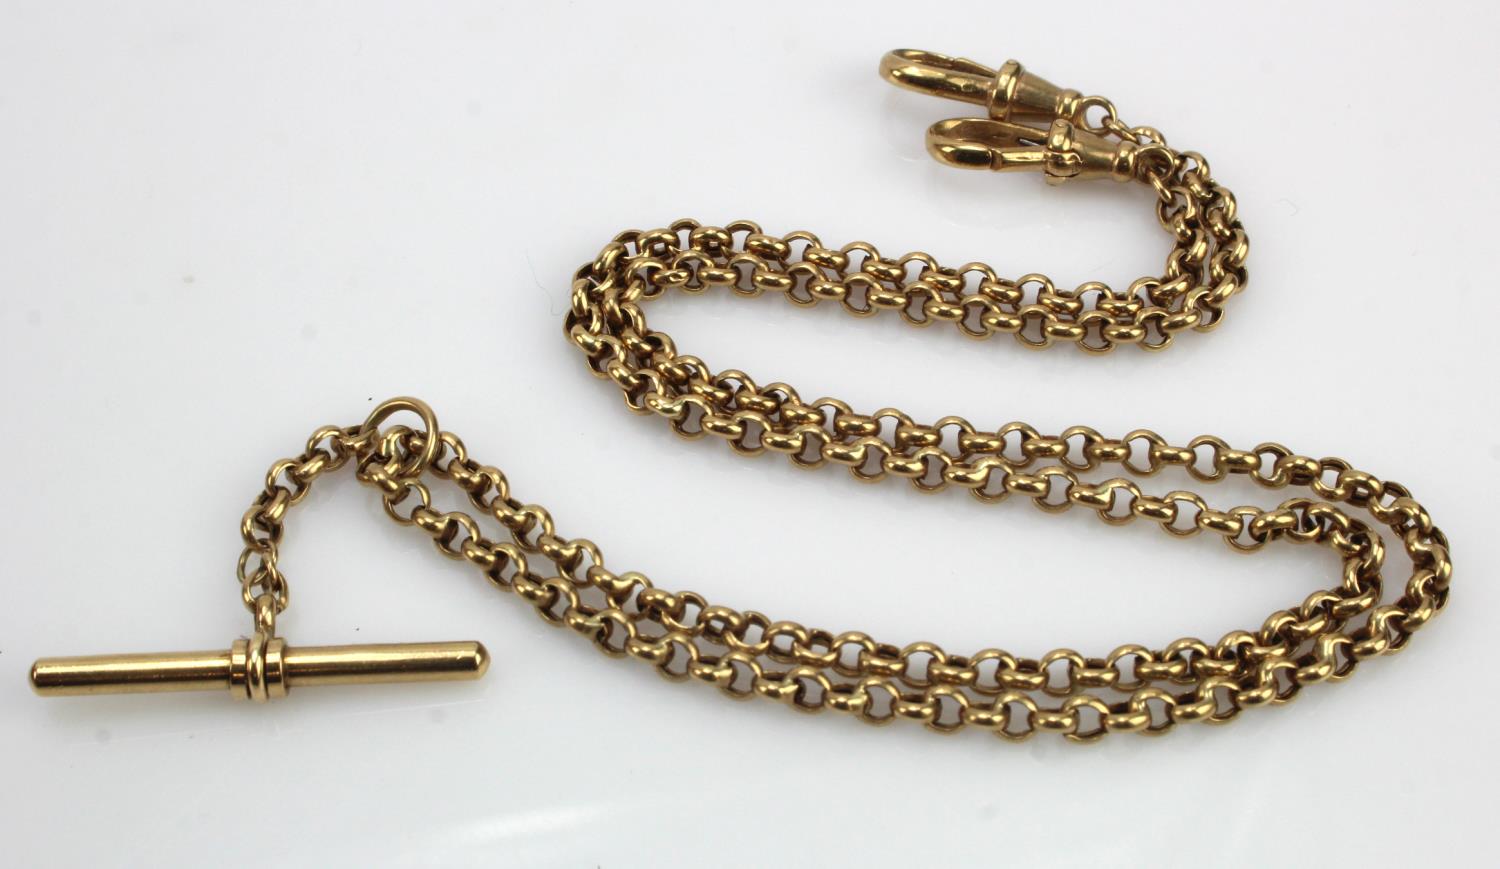 9ct "T" bar pocket watch chain. Length approx 53cm, weight 13.6g